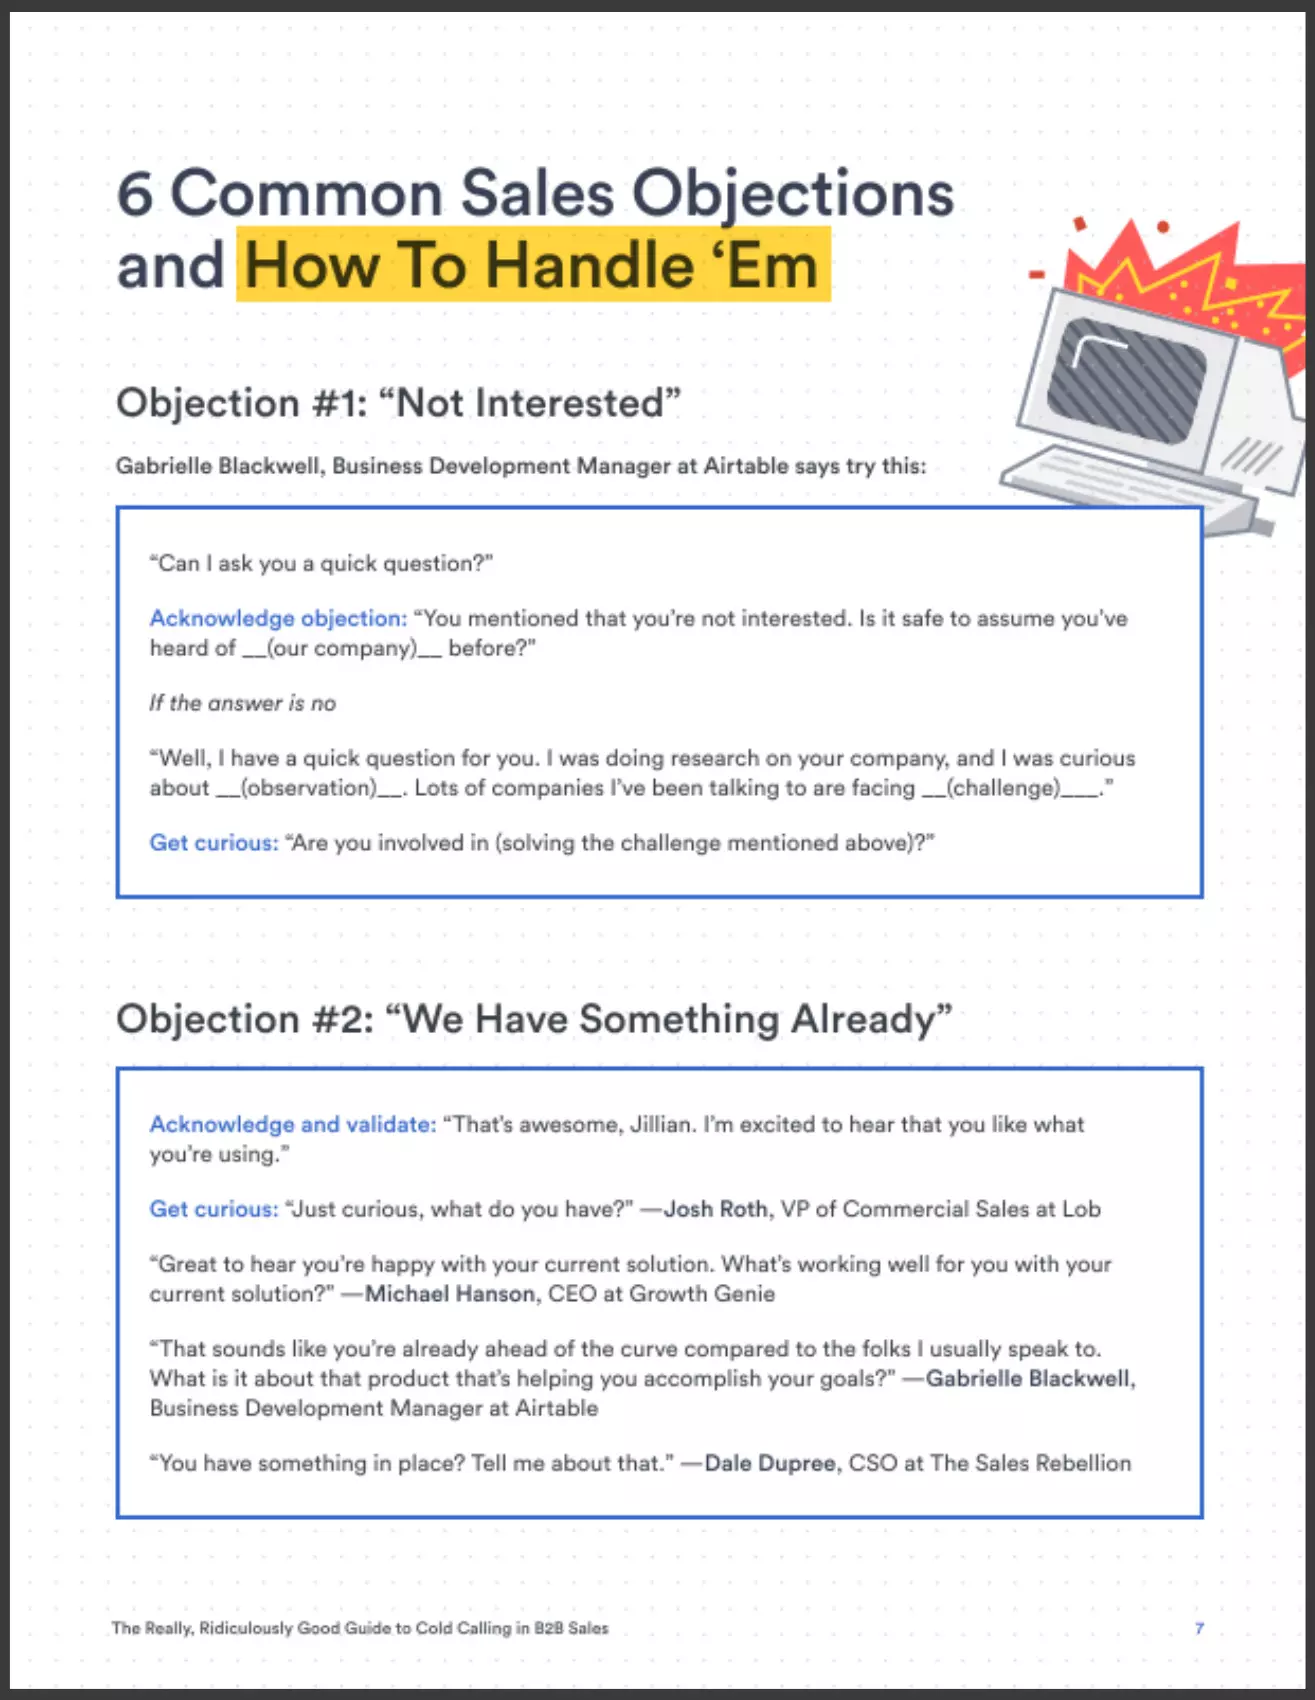 6 Common Sales Objections and How To Handle 'Em